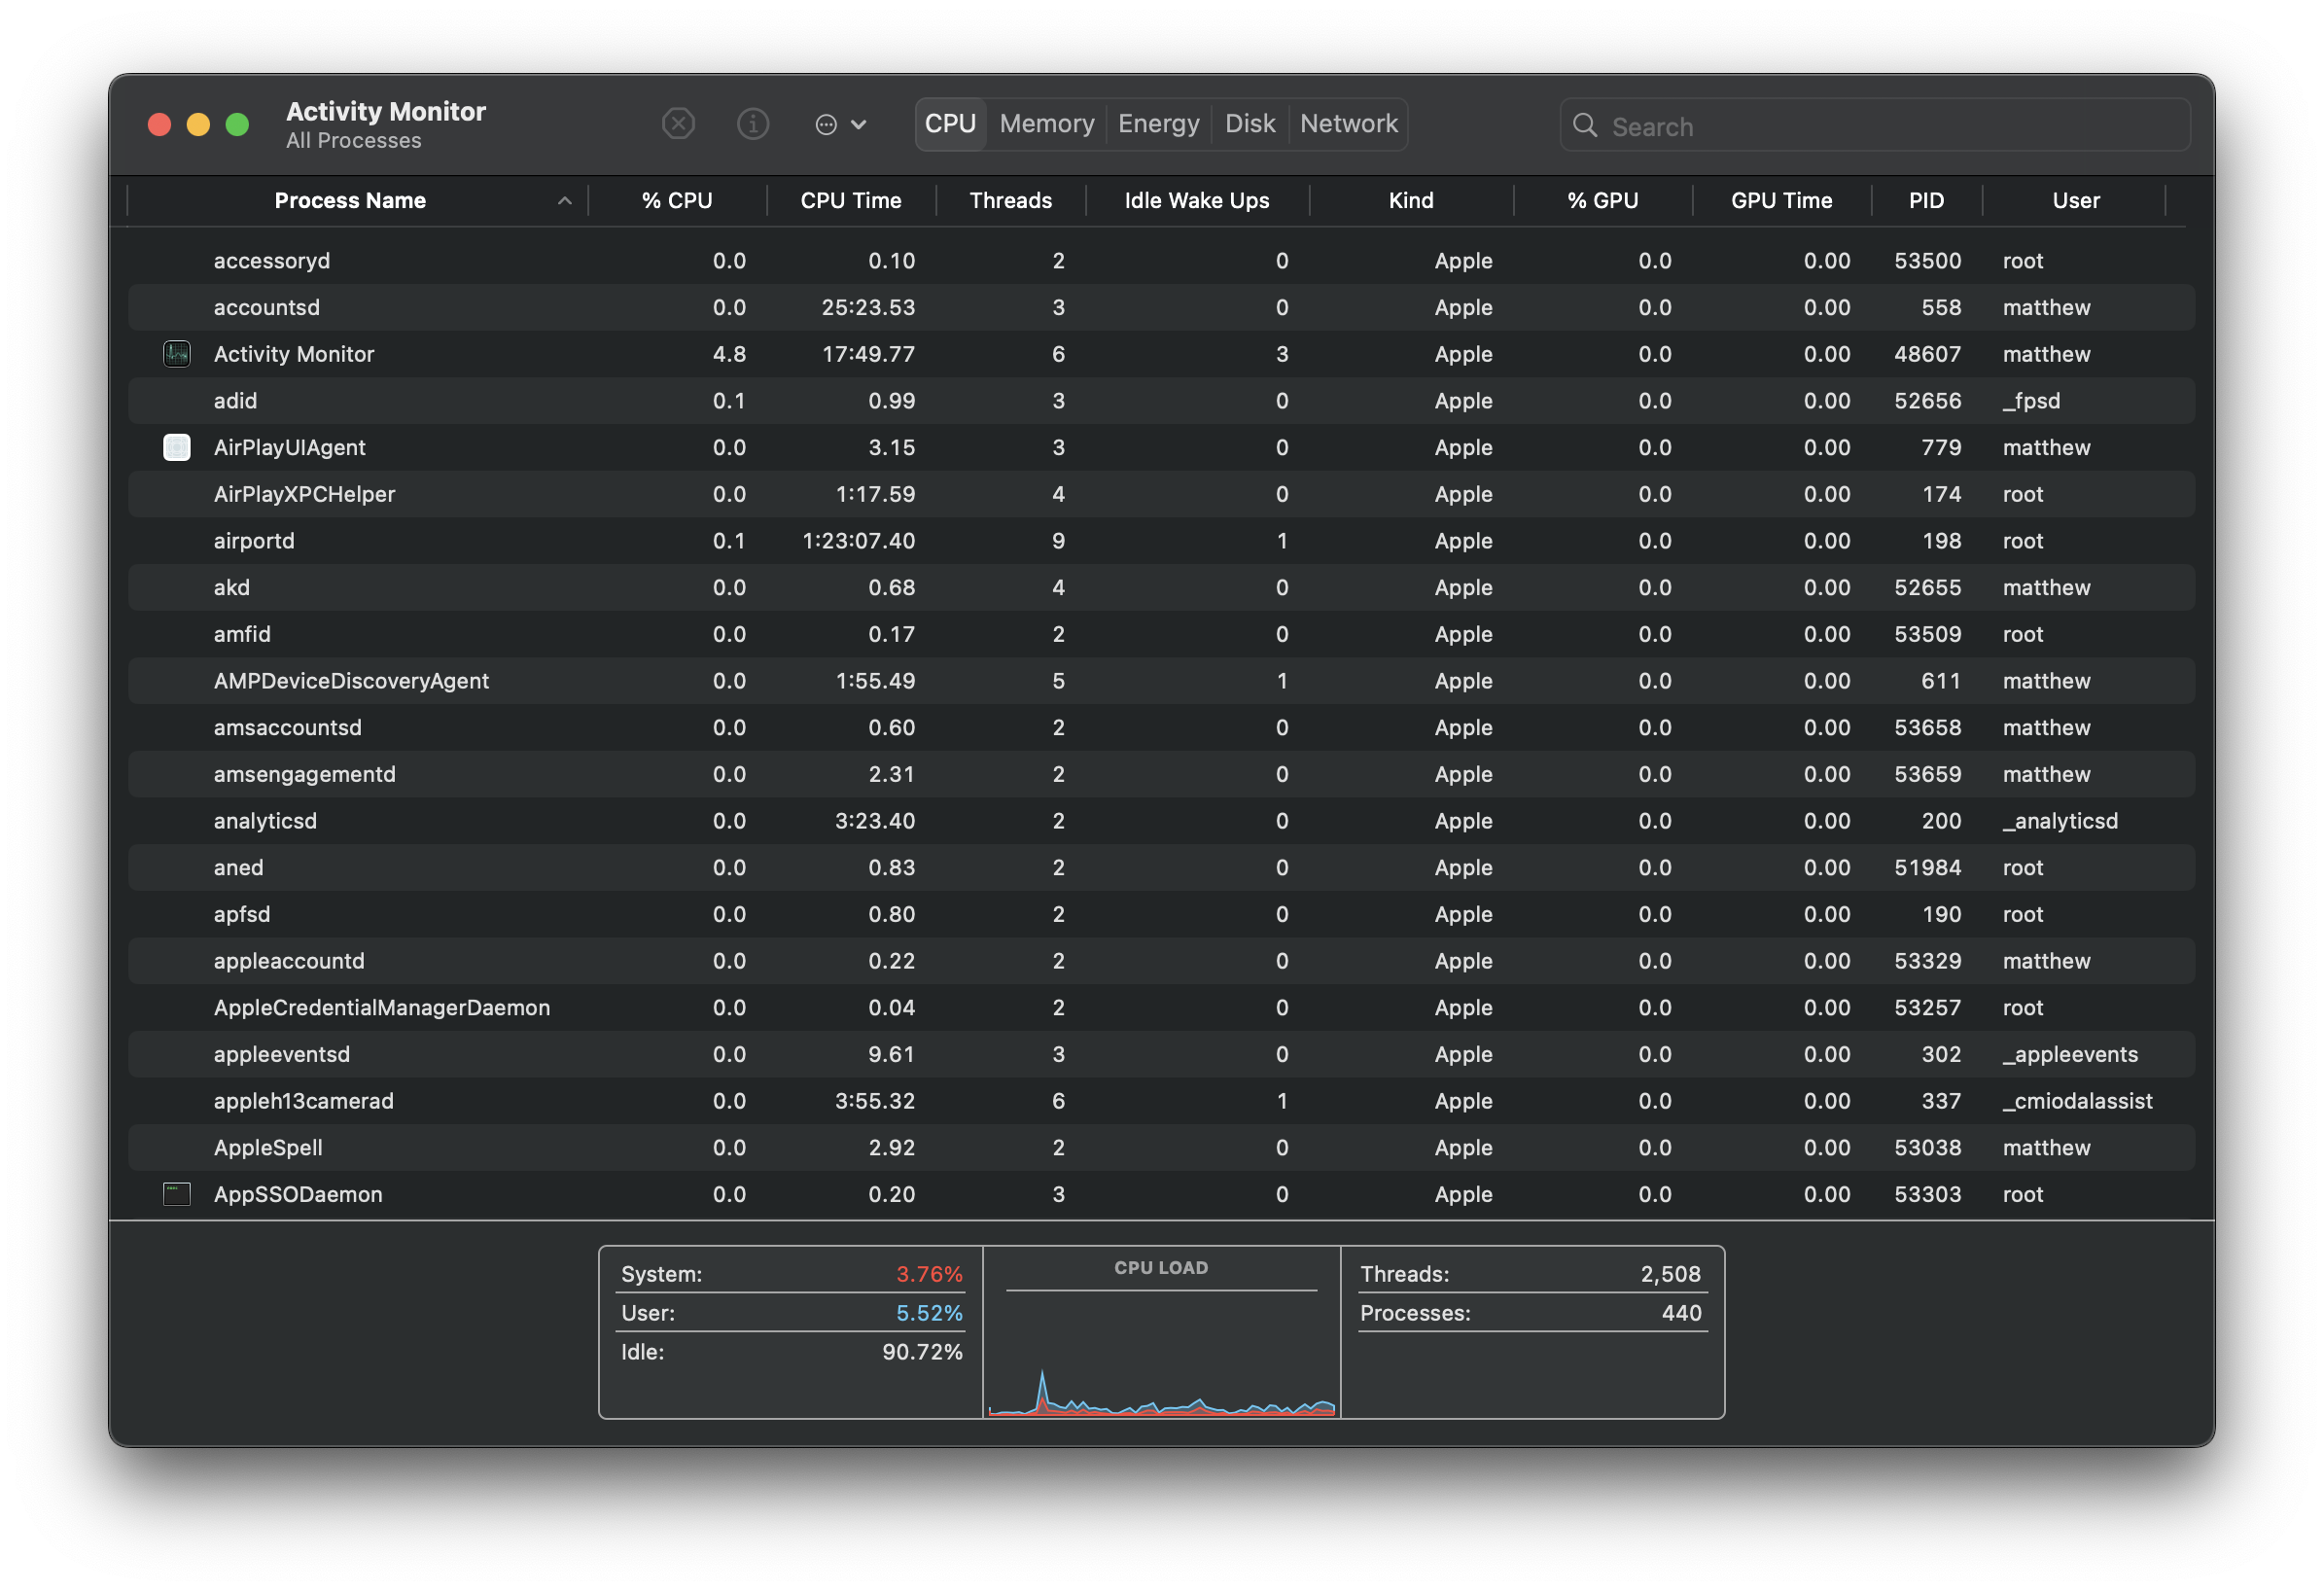 Activity Monitor showing the kind of application that is running on the MacBook Air.